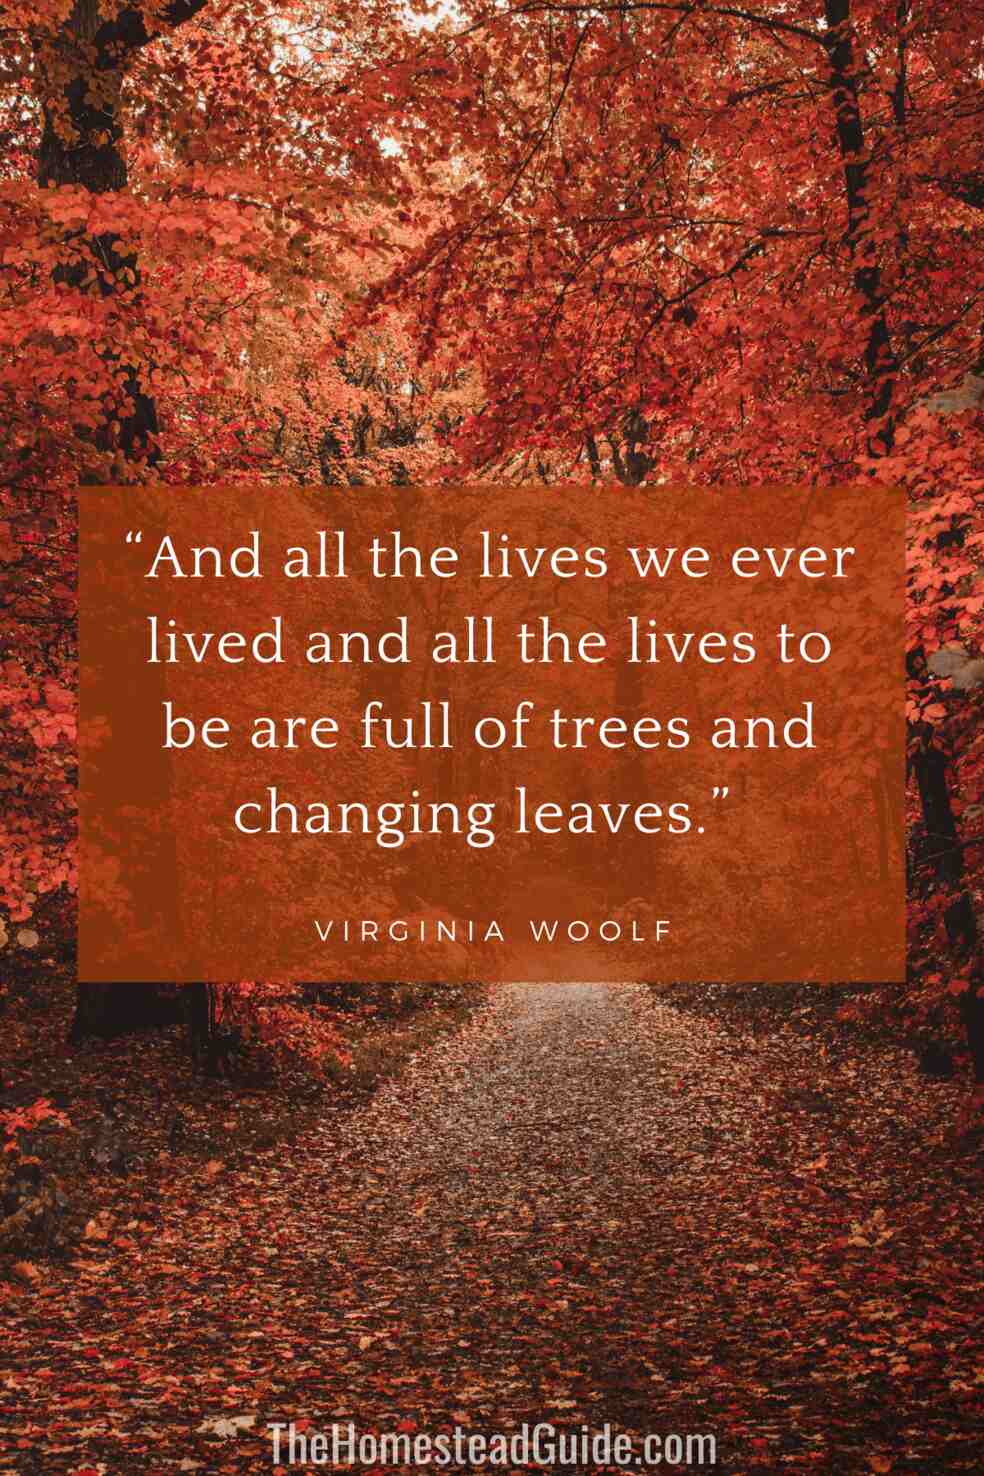 And all the lives we ever lived and all the lives to be are full of trees and changing leaves.